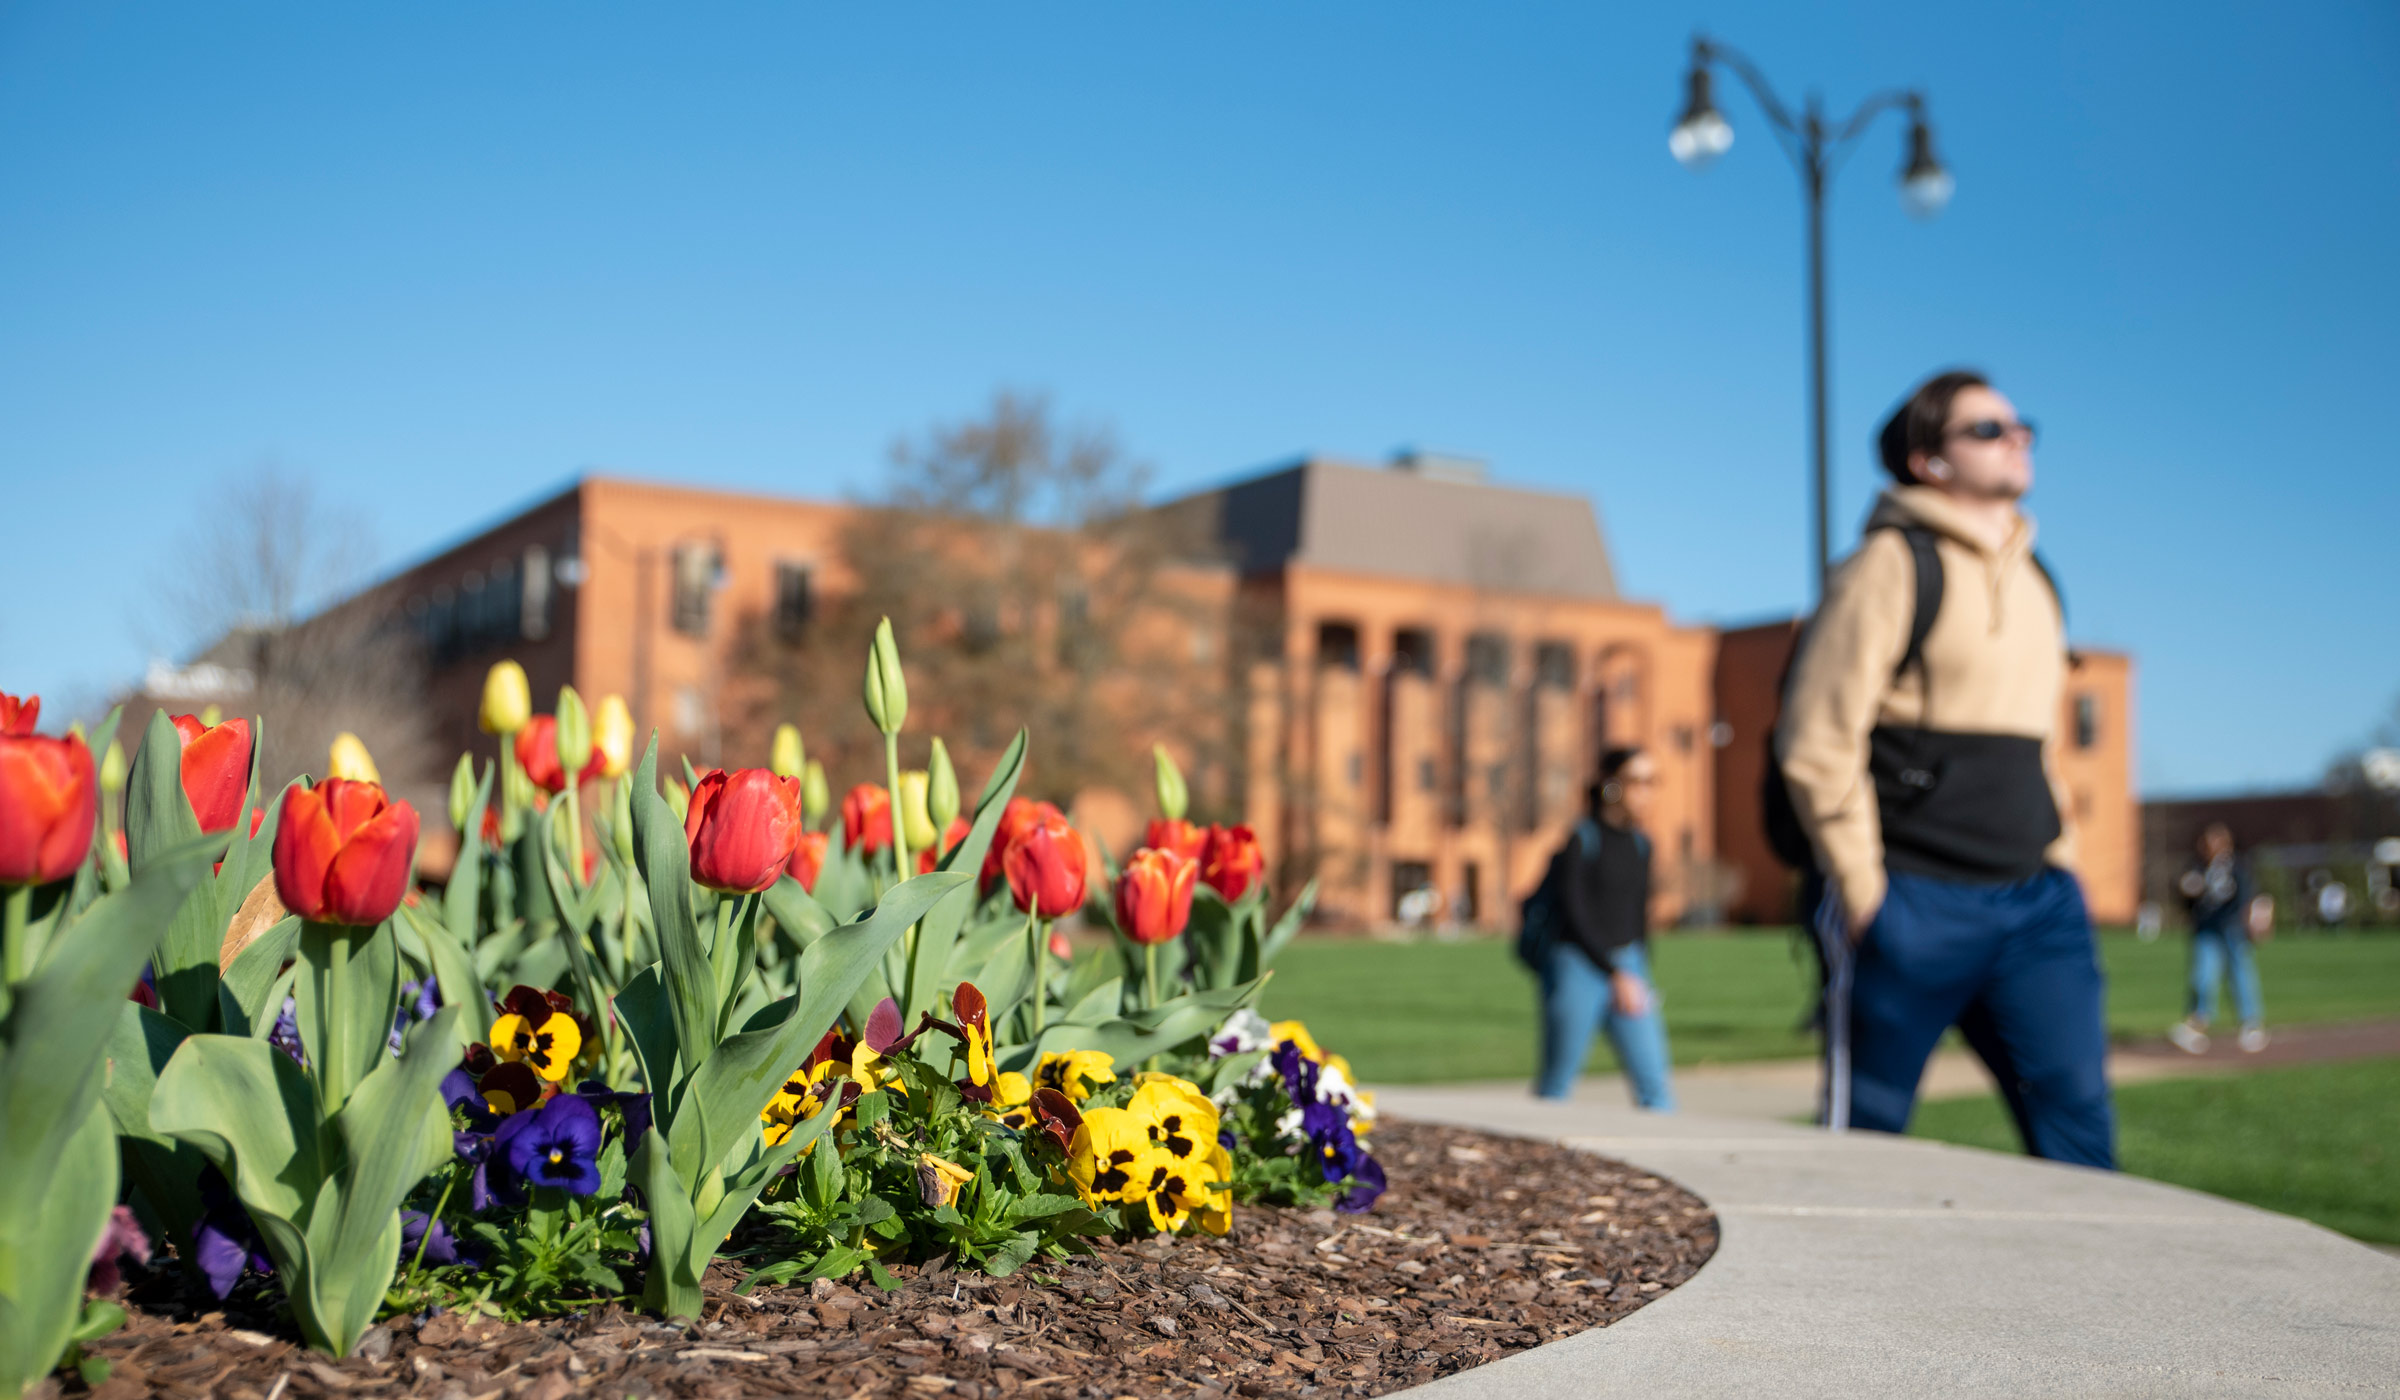 With red and yellow tulips in focus in the foreground, students walk past a Drill Field sidewalk in the background with McCool and blue sky beyond.